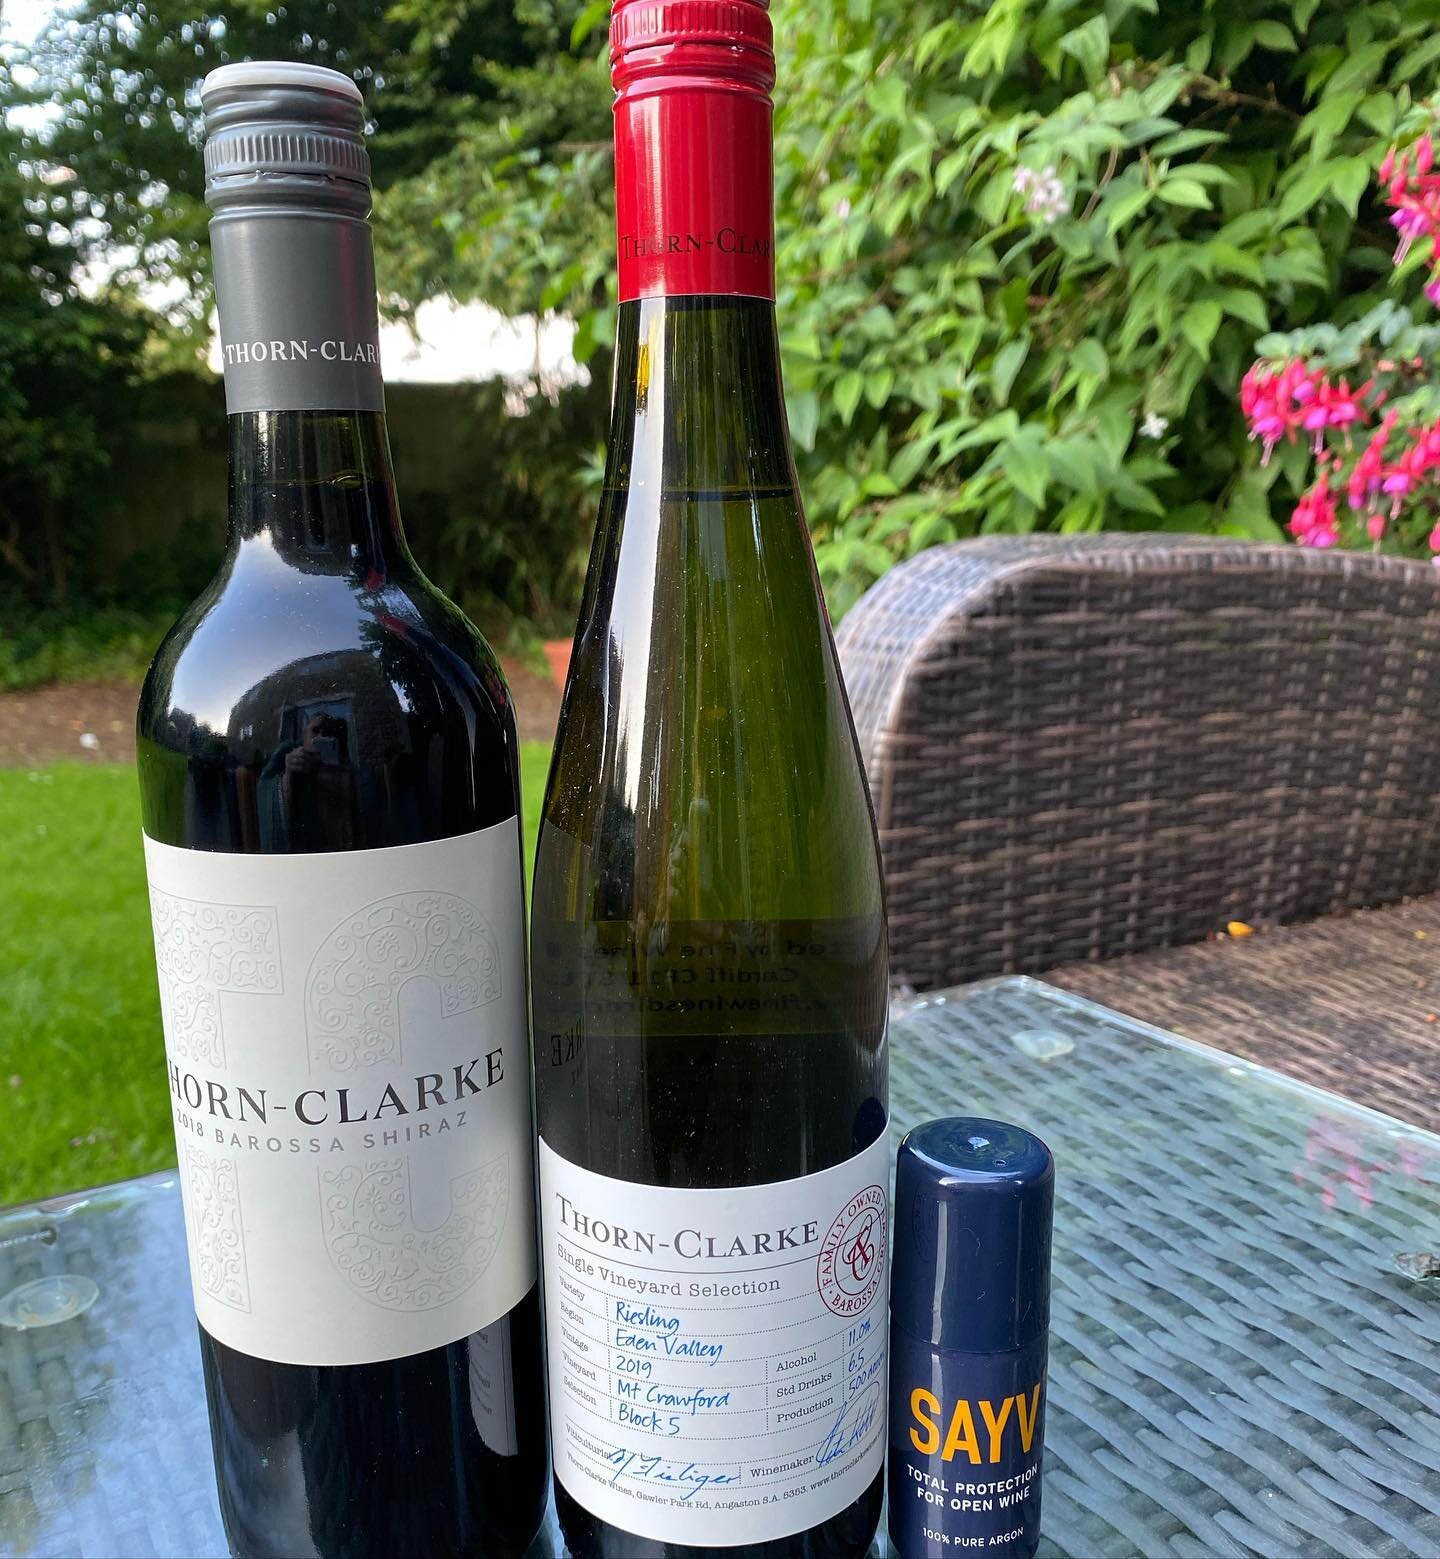 Great to try the new @thornclarke wines from @finewinescardiff yesterday. And happy to be able to keep them with my new dinky little can of Sayv - argon gas to  keep the wine fresh. Thanks for the introduction @angelamount03 
.
.
.
.
#winetasting #vi